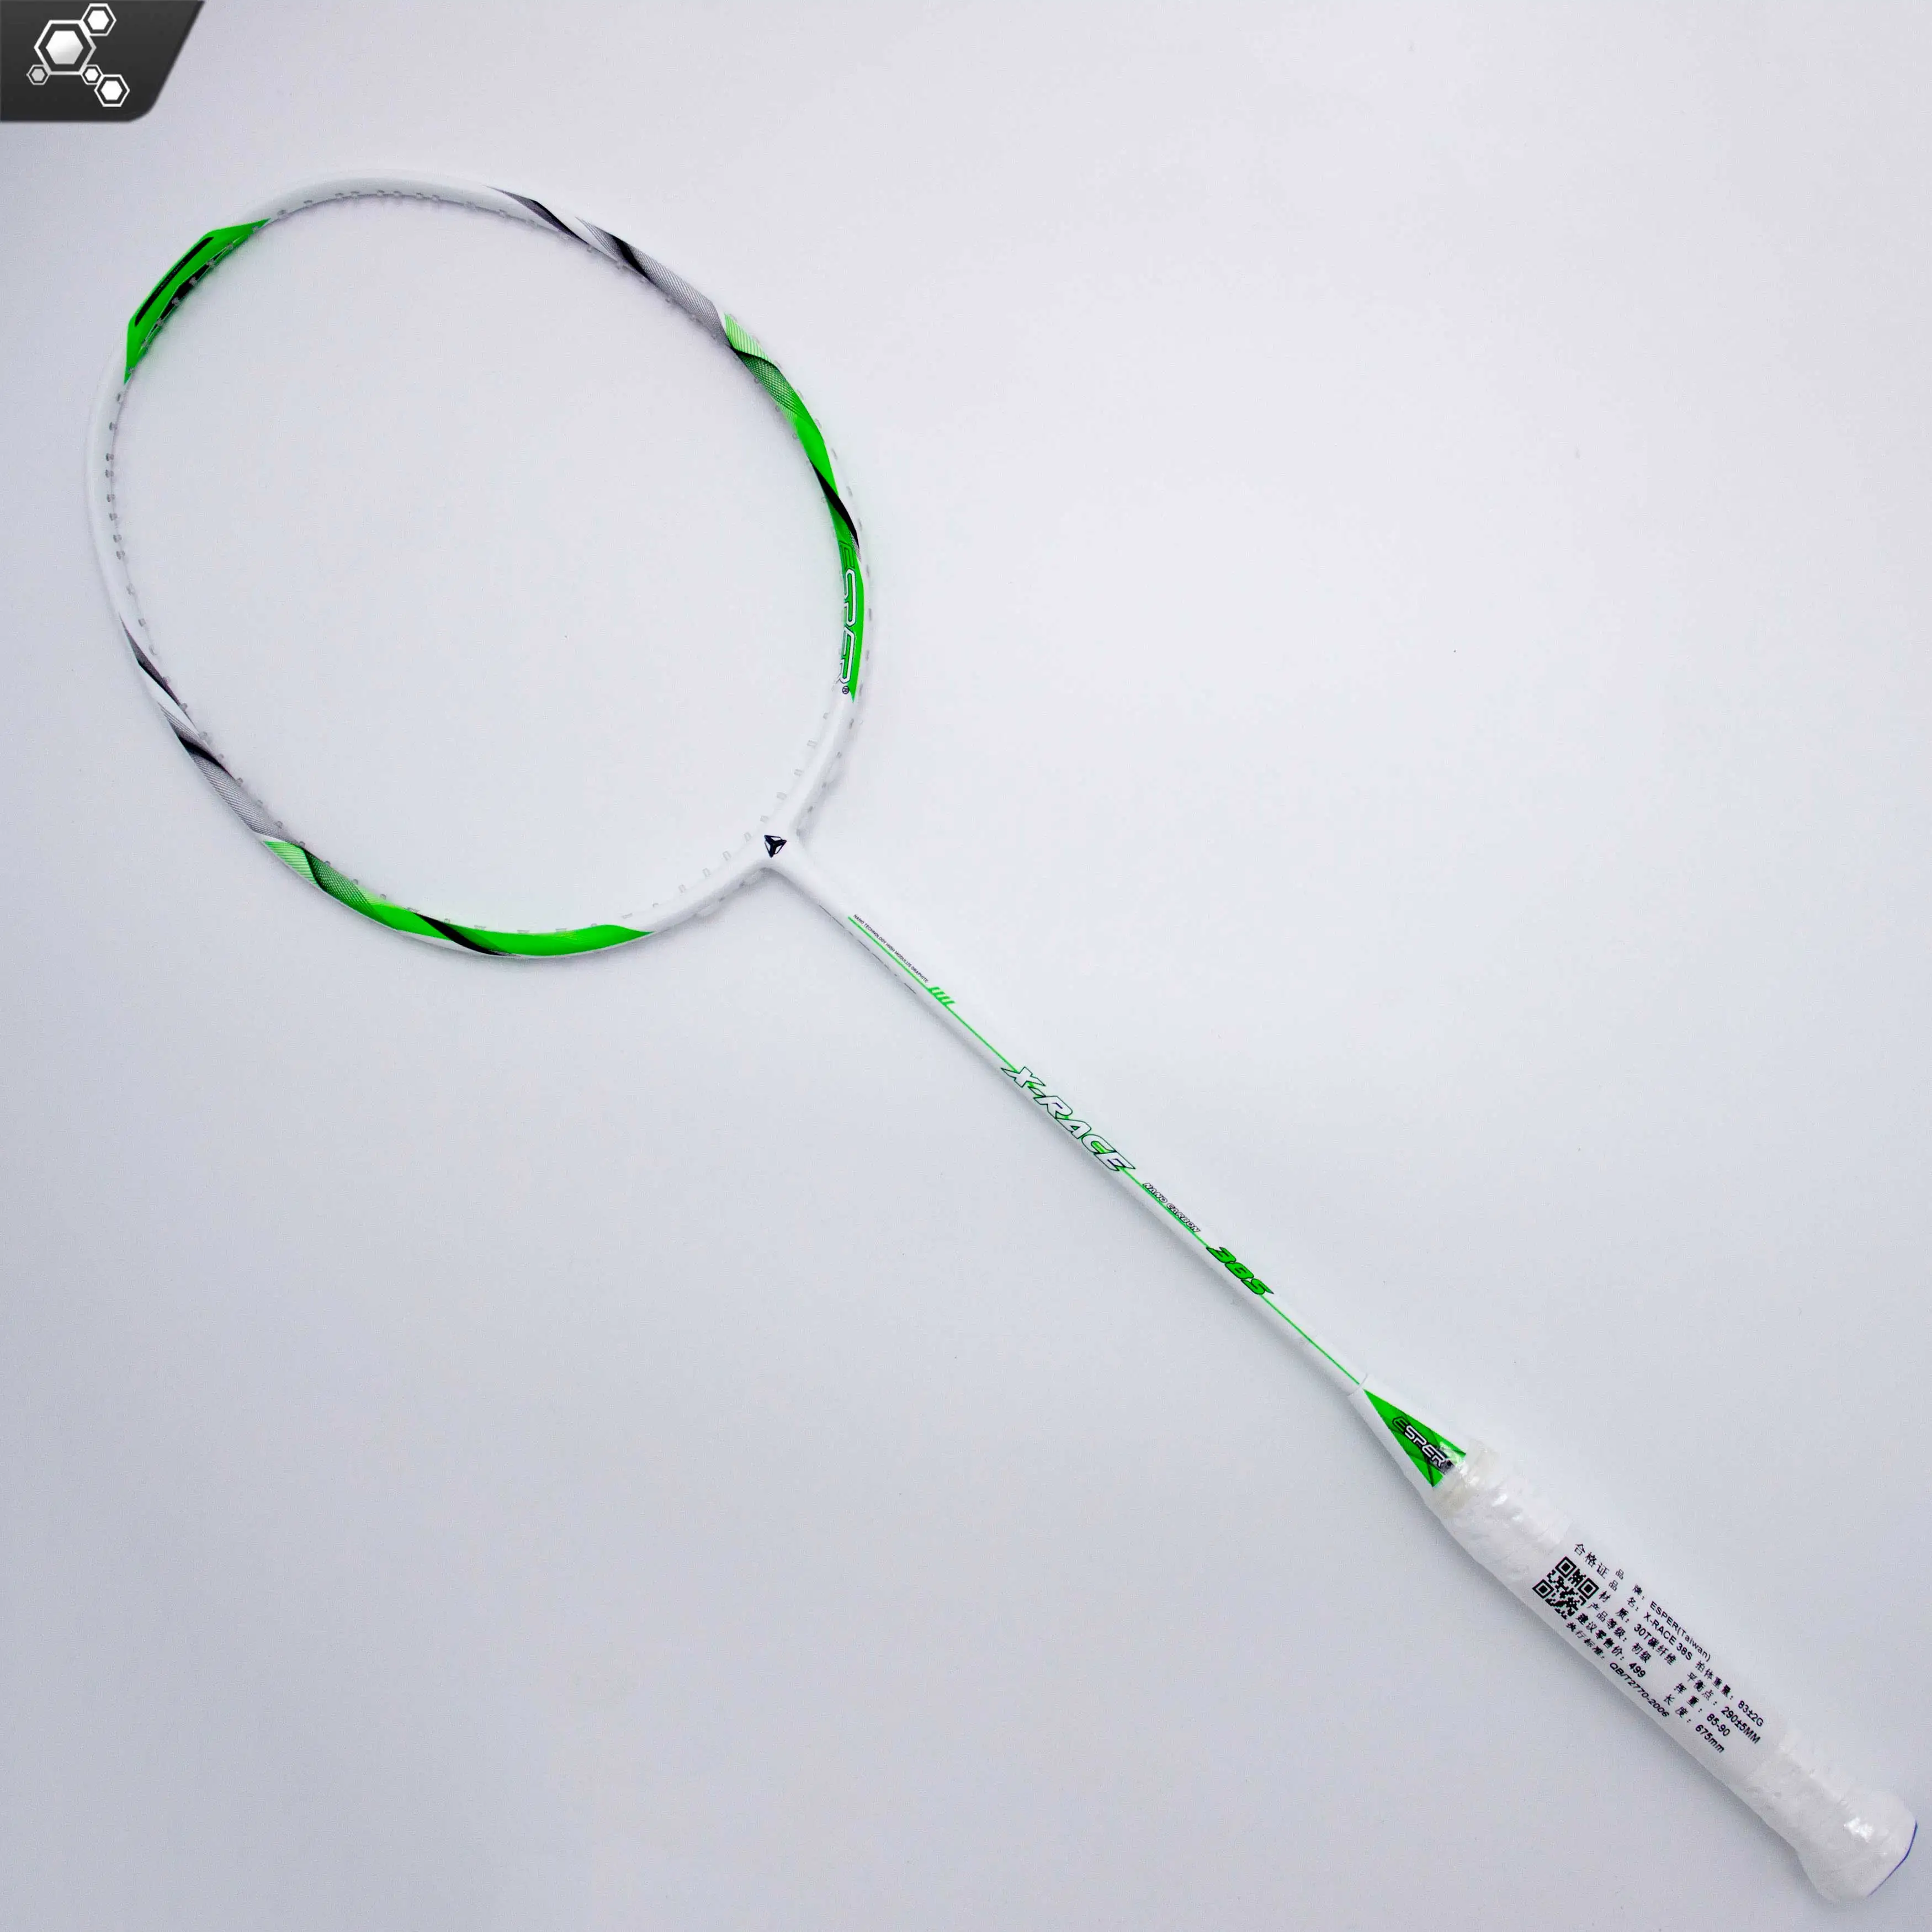 

ESPER 38S- GuangDong Province Manufacture with Japanese Toray Graphite/ Carbon Fiber OEM ODM Customized Badminton Racket, White and green